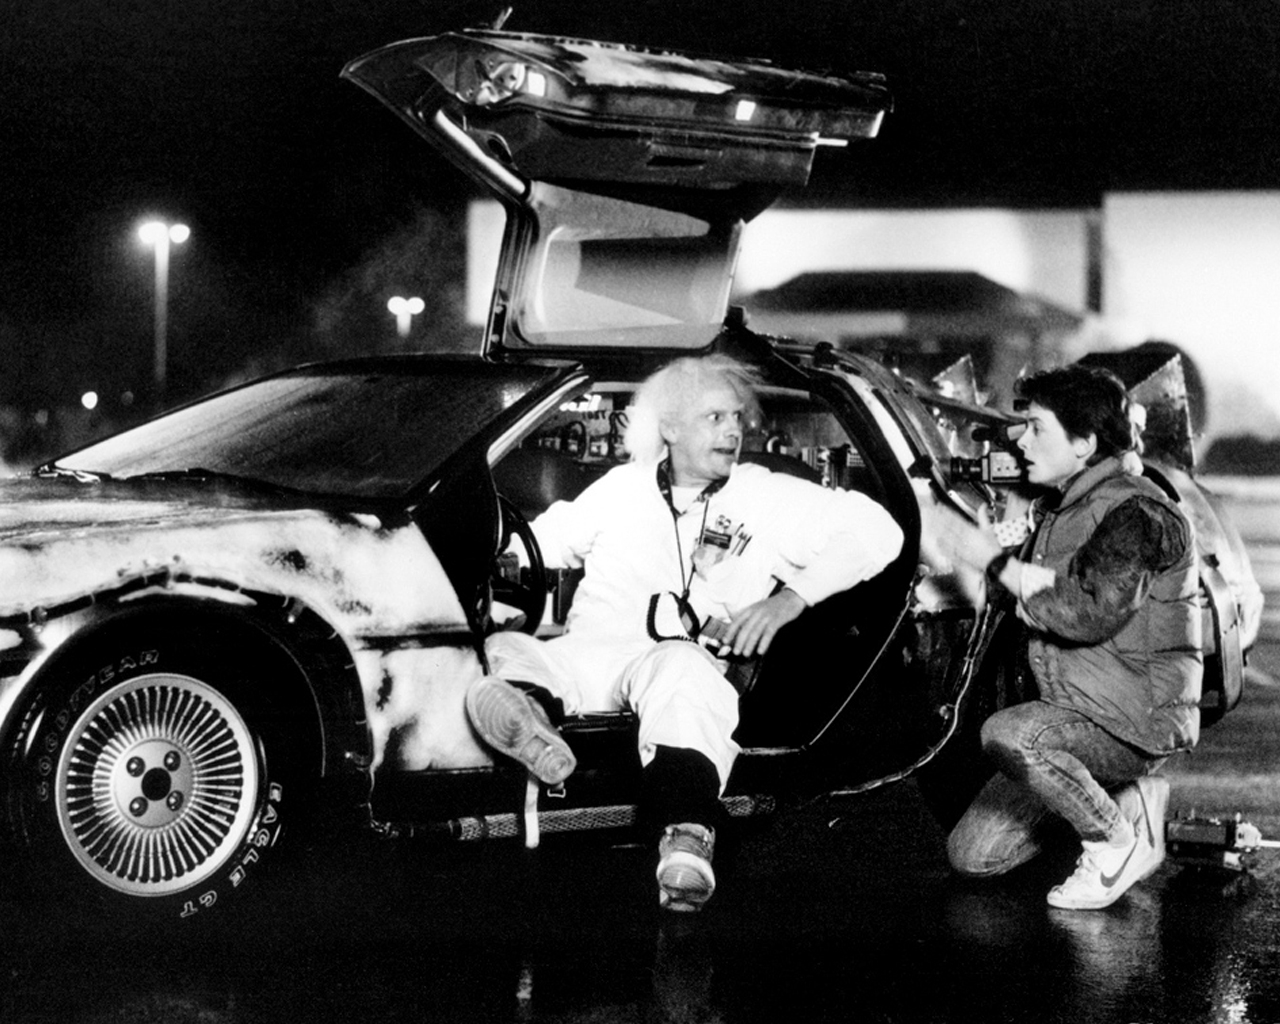 back to the future time machine grayscale doc brown michael j fox marty mcfly delorean dmc12 chris High Quality Wallpaper, High Definition Wallpaper